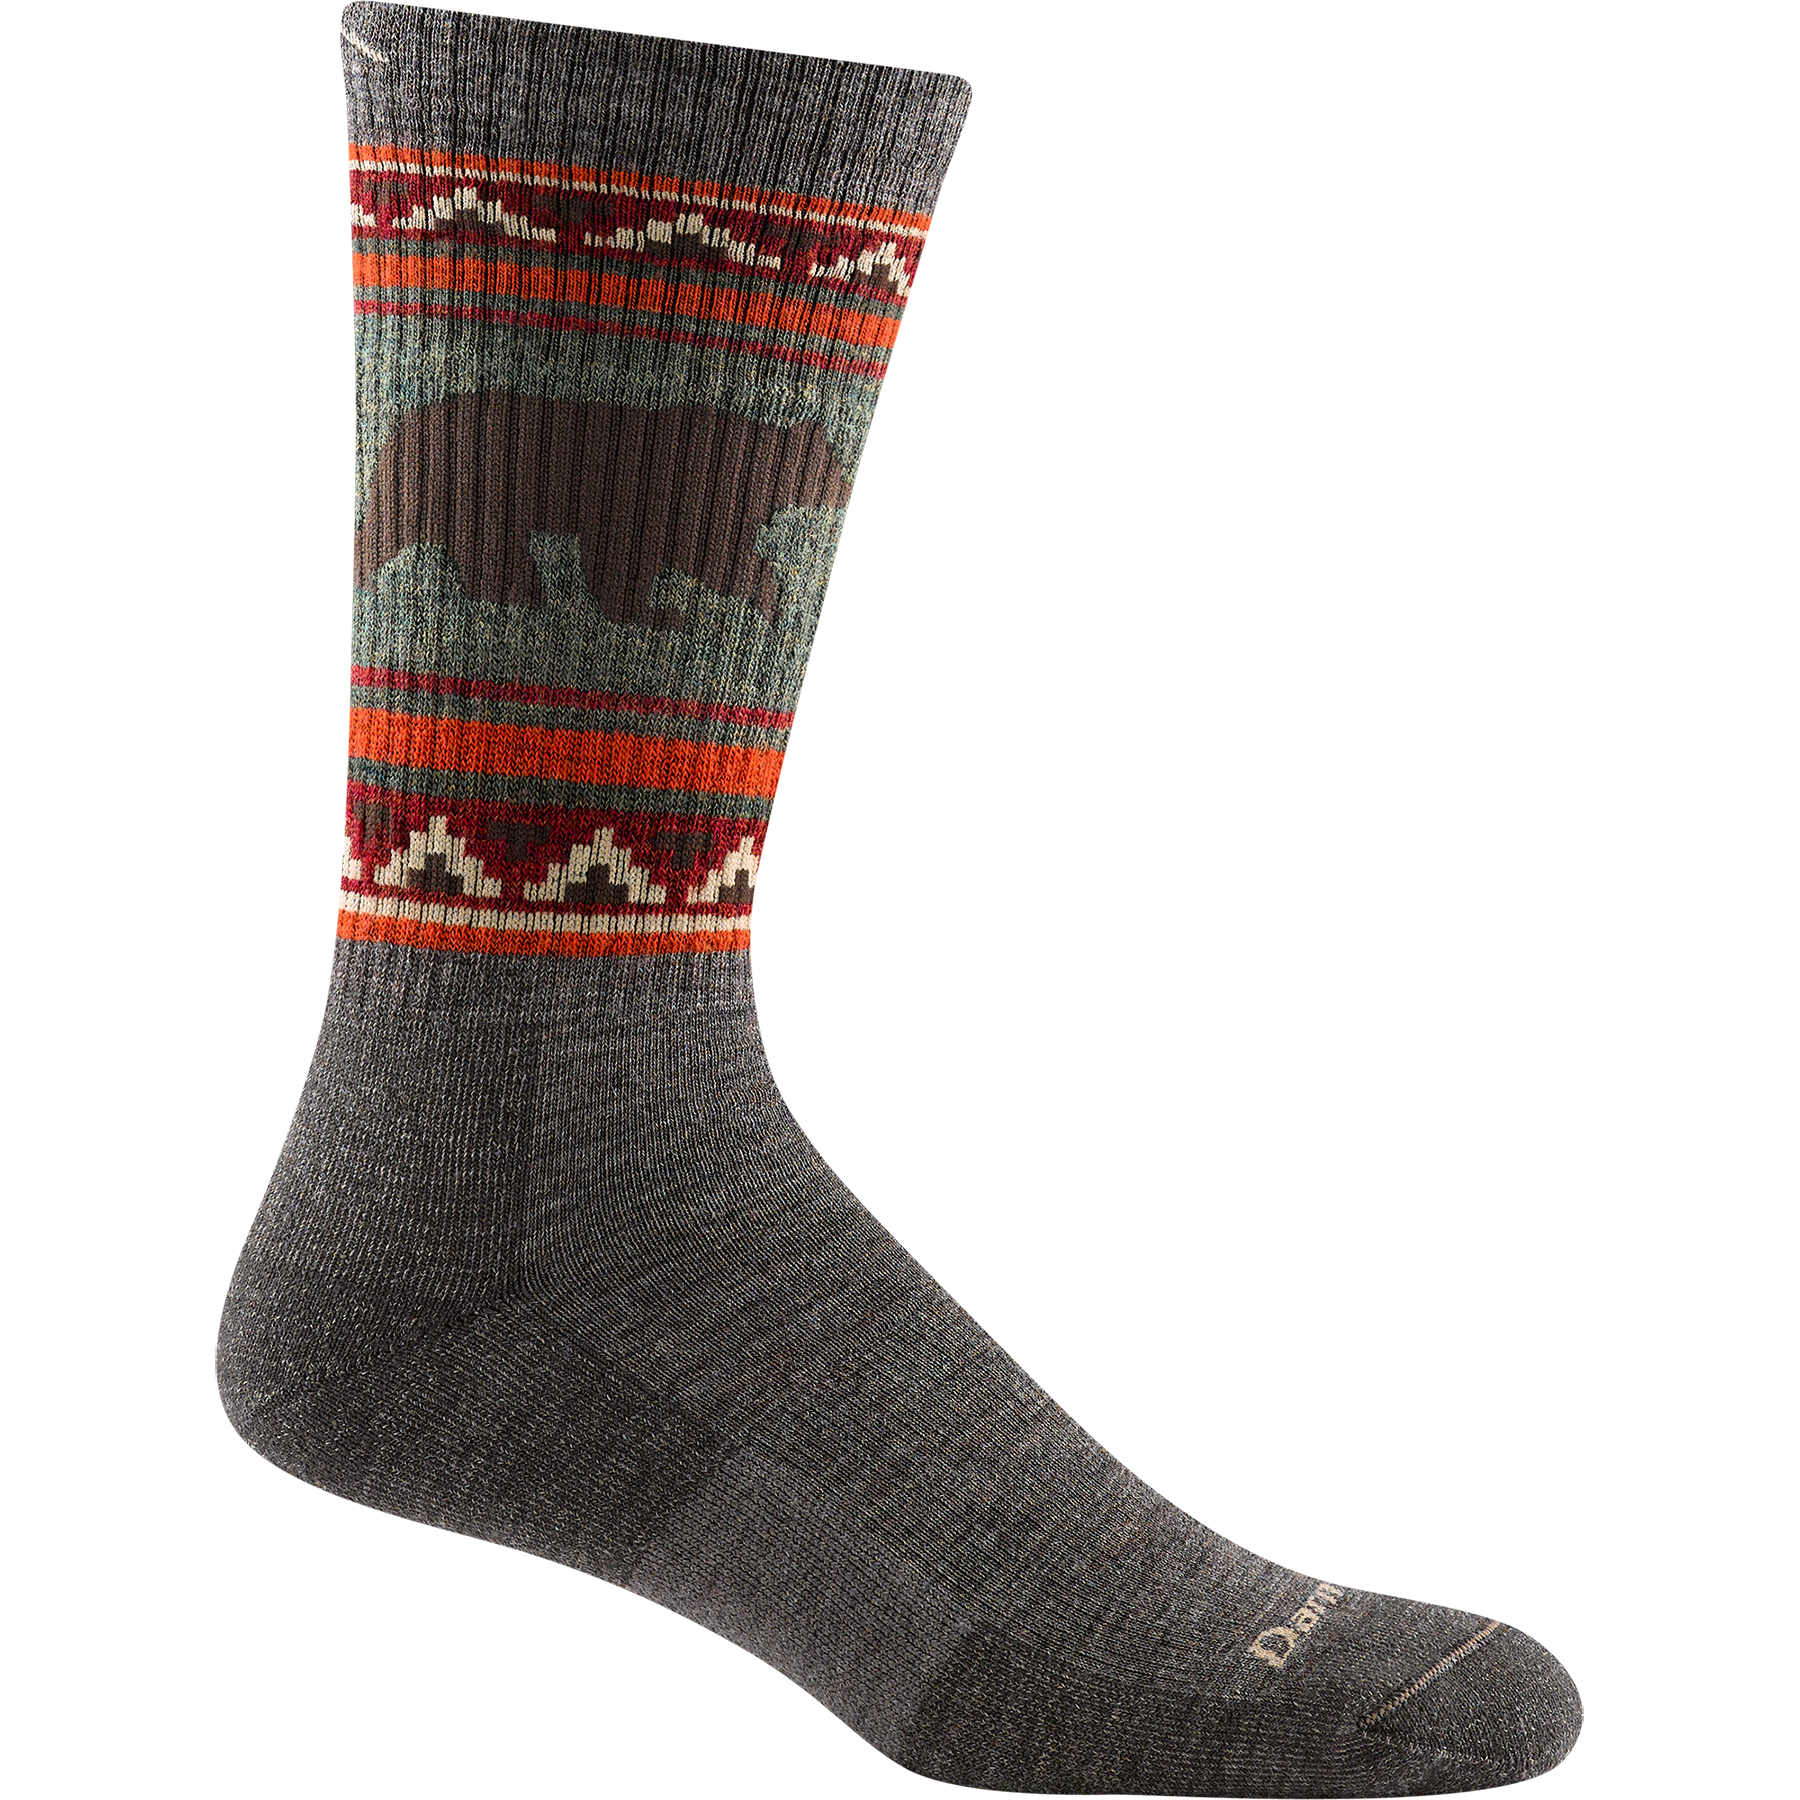 Darn tough taupe sock with bear and geometric print detail